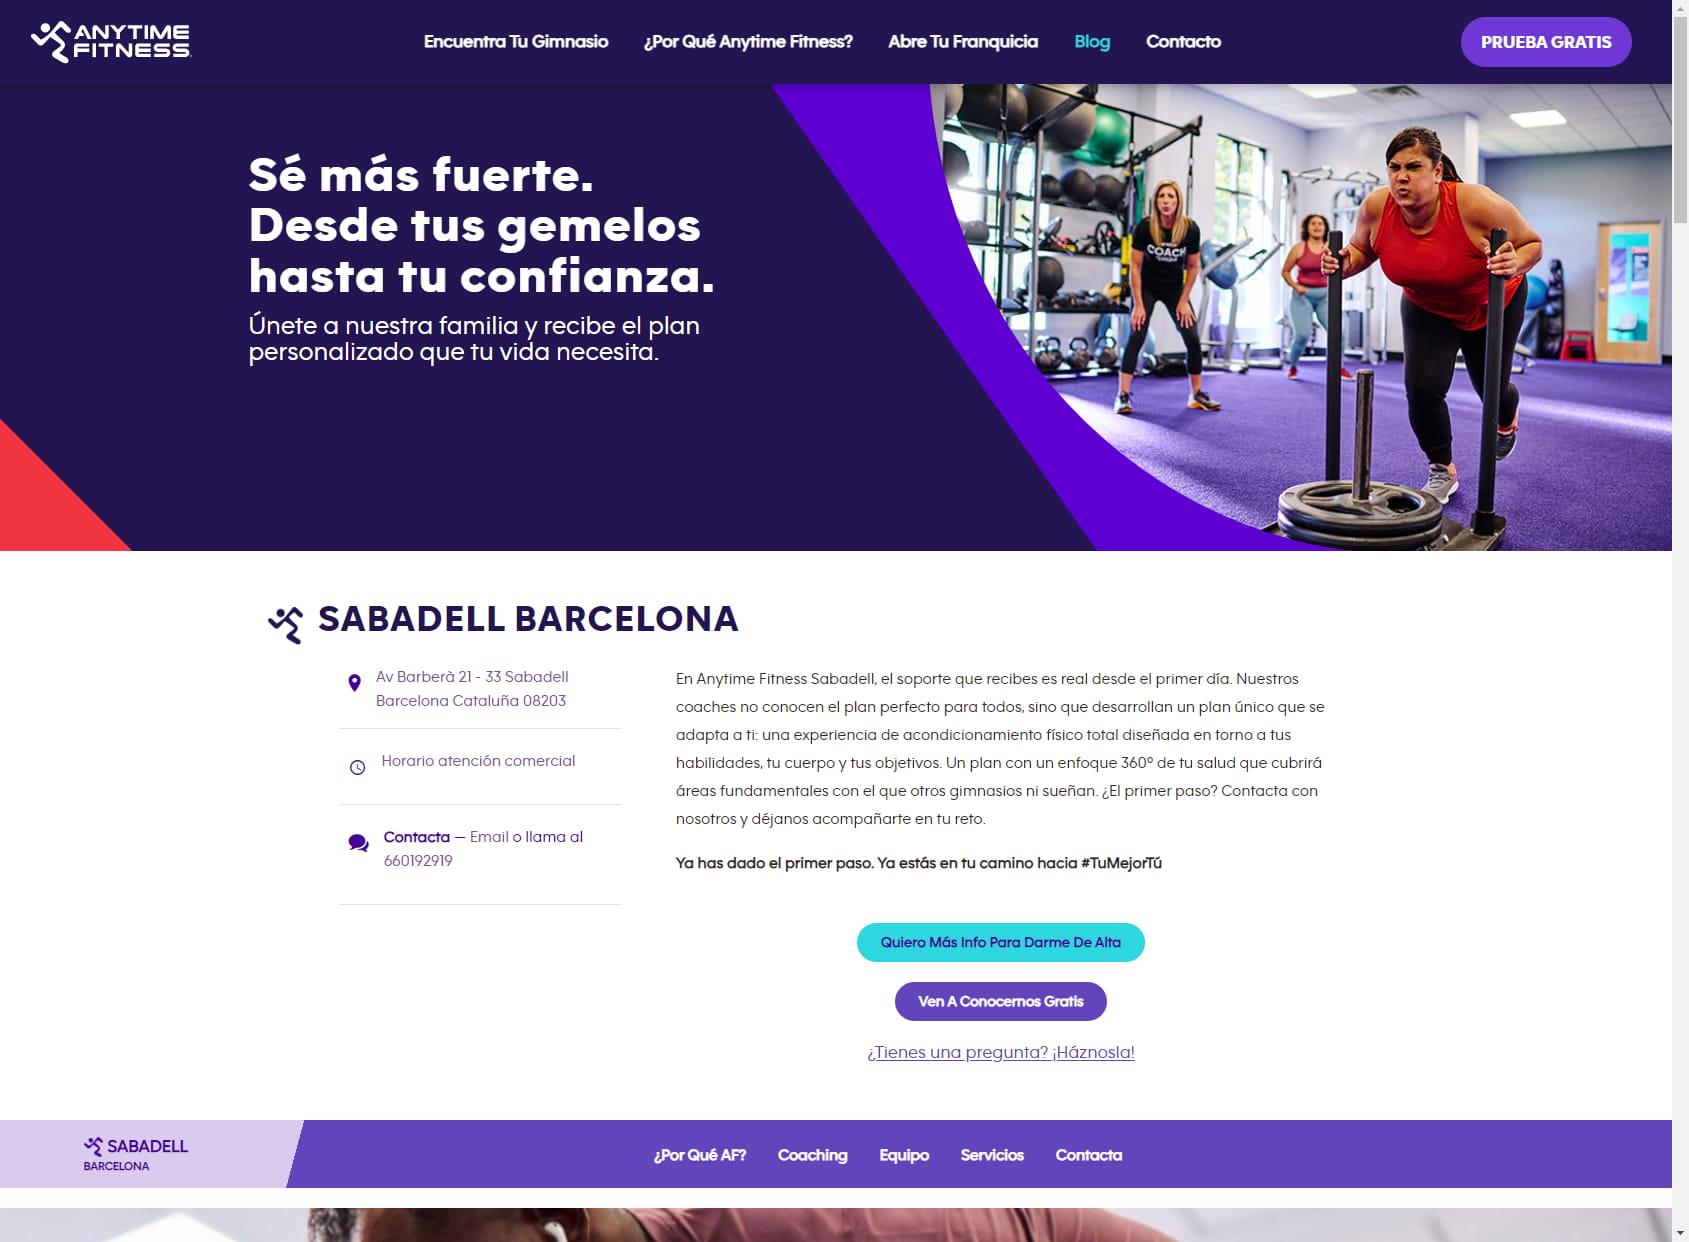 Anytime Fitness Sabadell